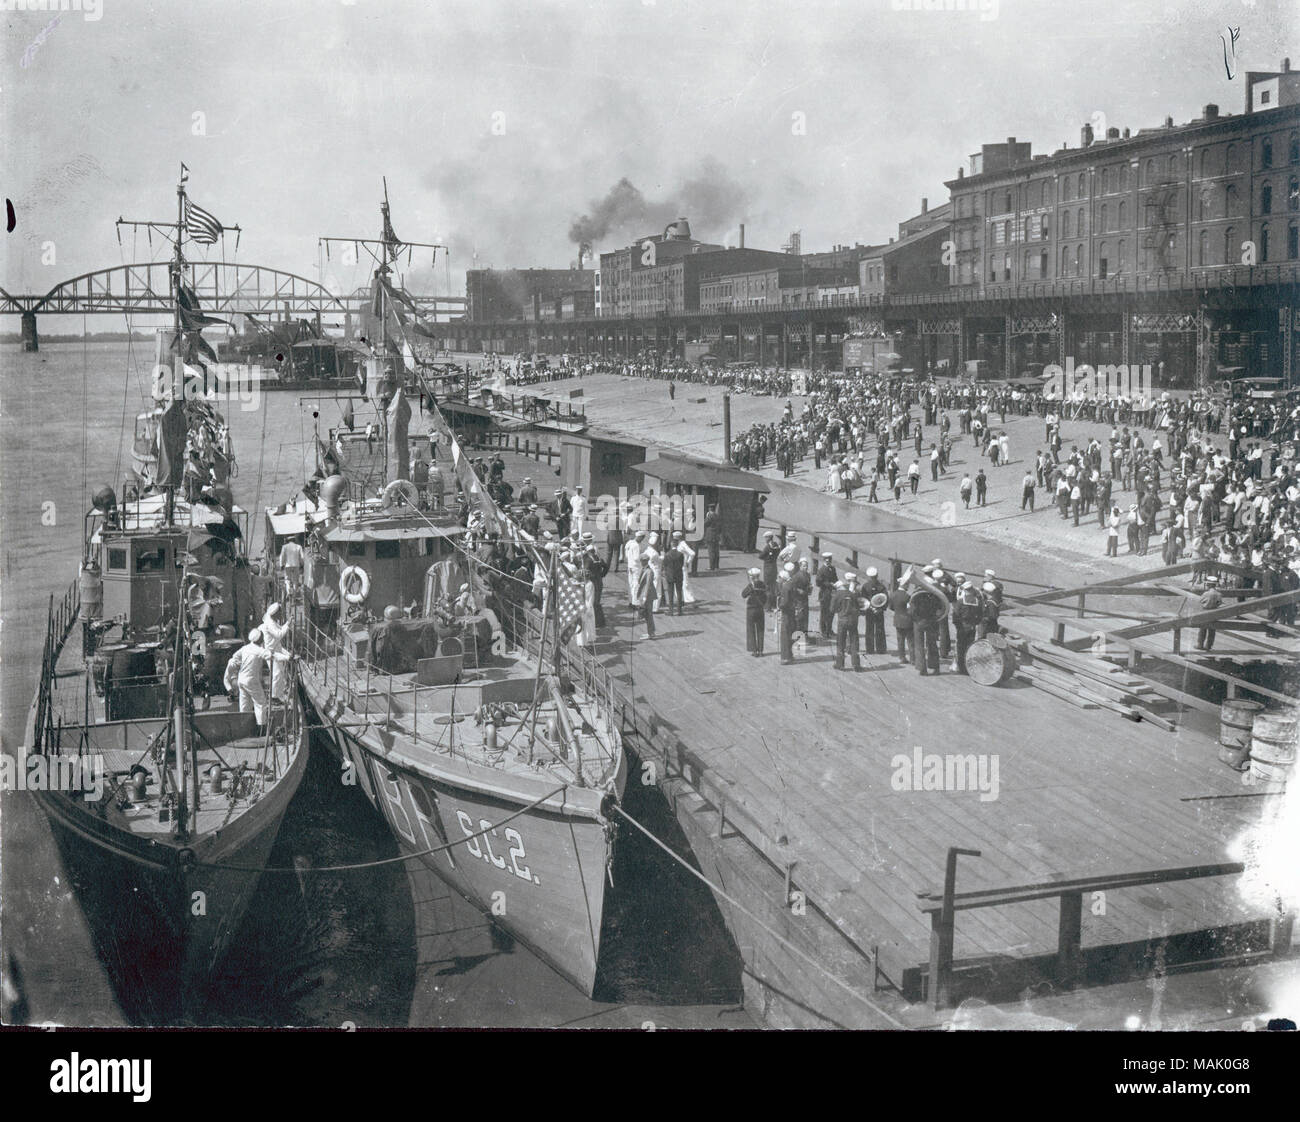 Horizontal, black and white photograph of a crowd greeting the United States Navy anti-submarine flotilla. Two flotillas are docked against a wooden deck with soldiers in both white and dark uniforms. The McKinley Bridge is present in the background of the photograph and railroad tracks are seen at the beginning of the city buildings. Title: Crowd on riverfront greeting U.S. Navy anti-submarine flotilla for demonstration visit. 13 June 1919.  . 1919. Stock Photo